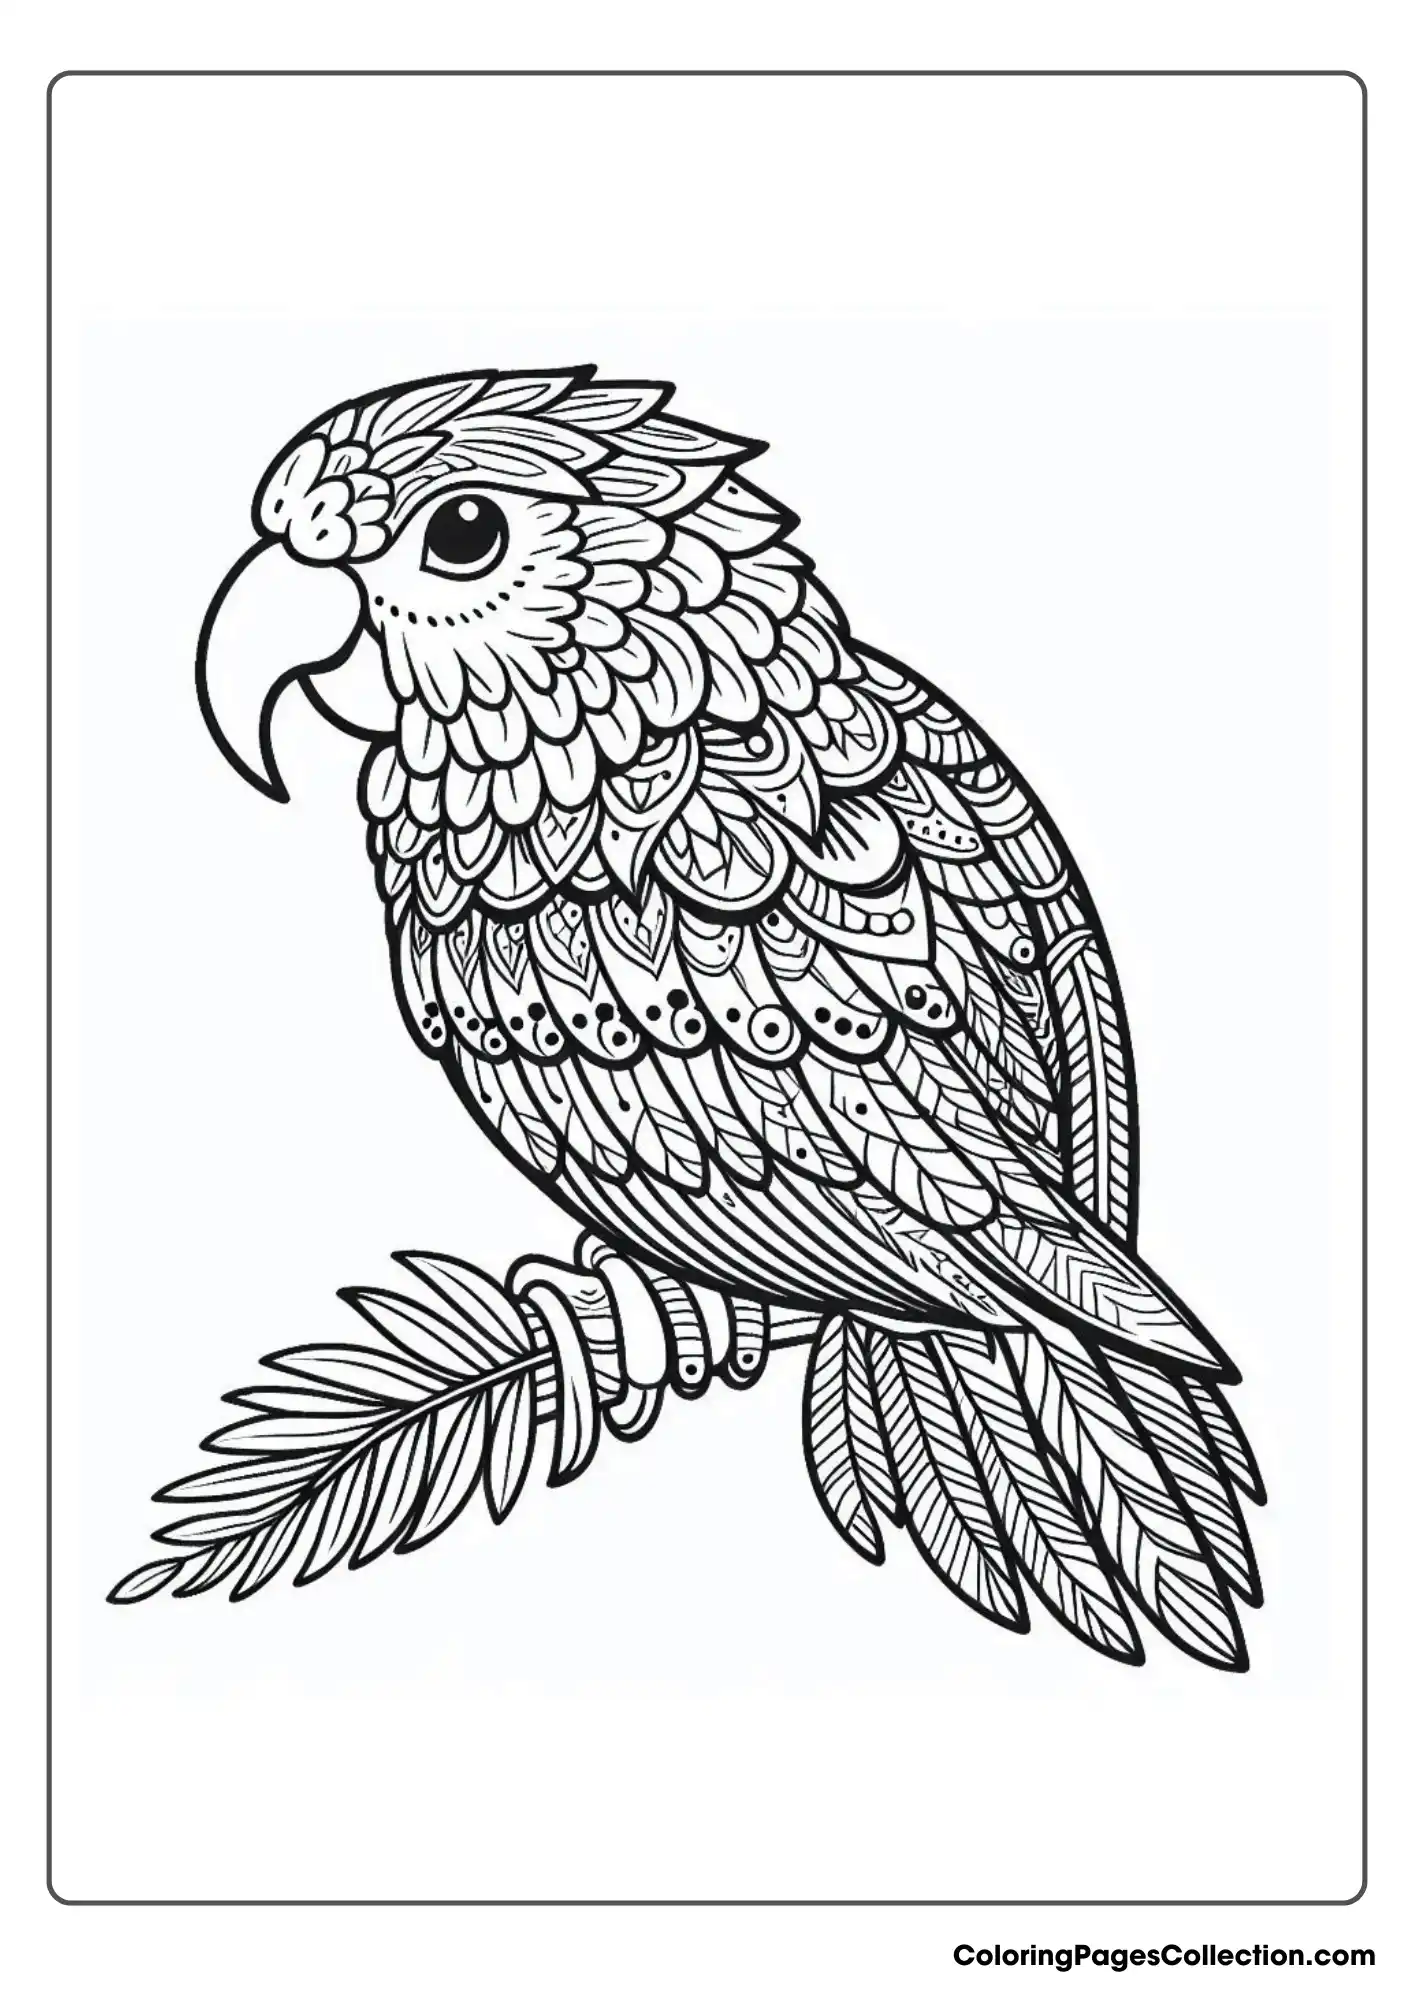 A Parrot With Detailed Feather Patterns